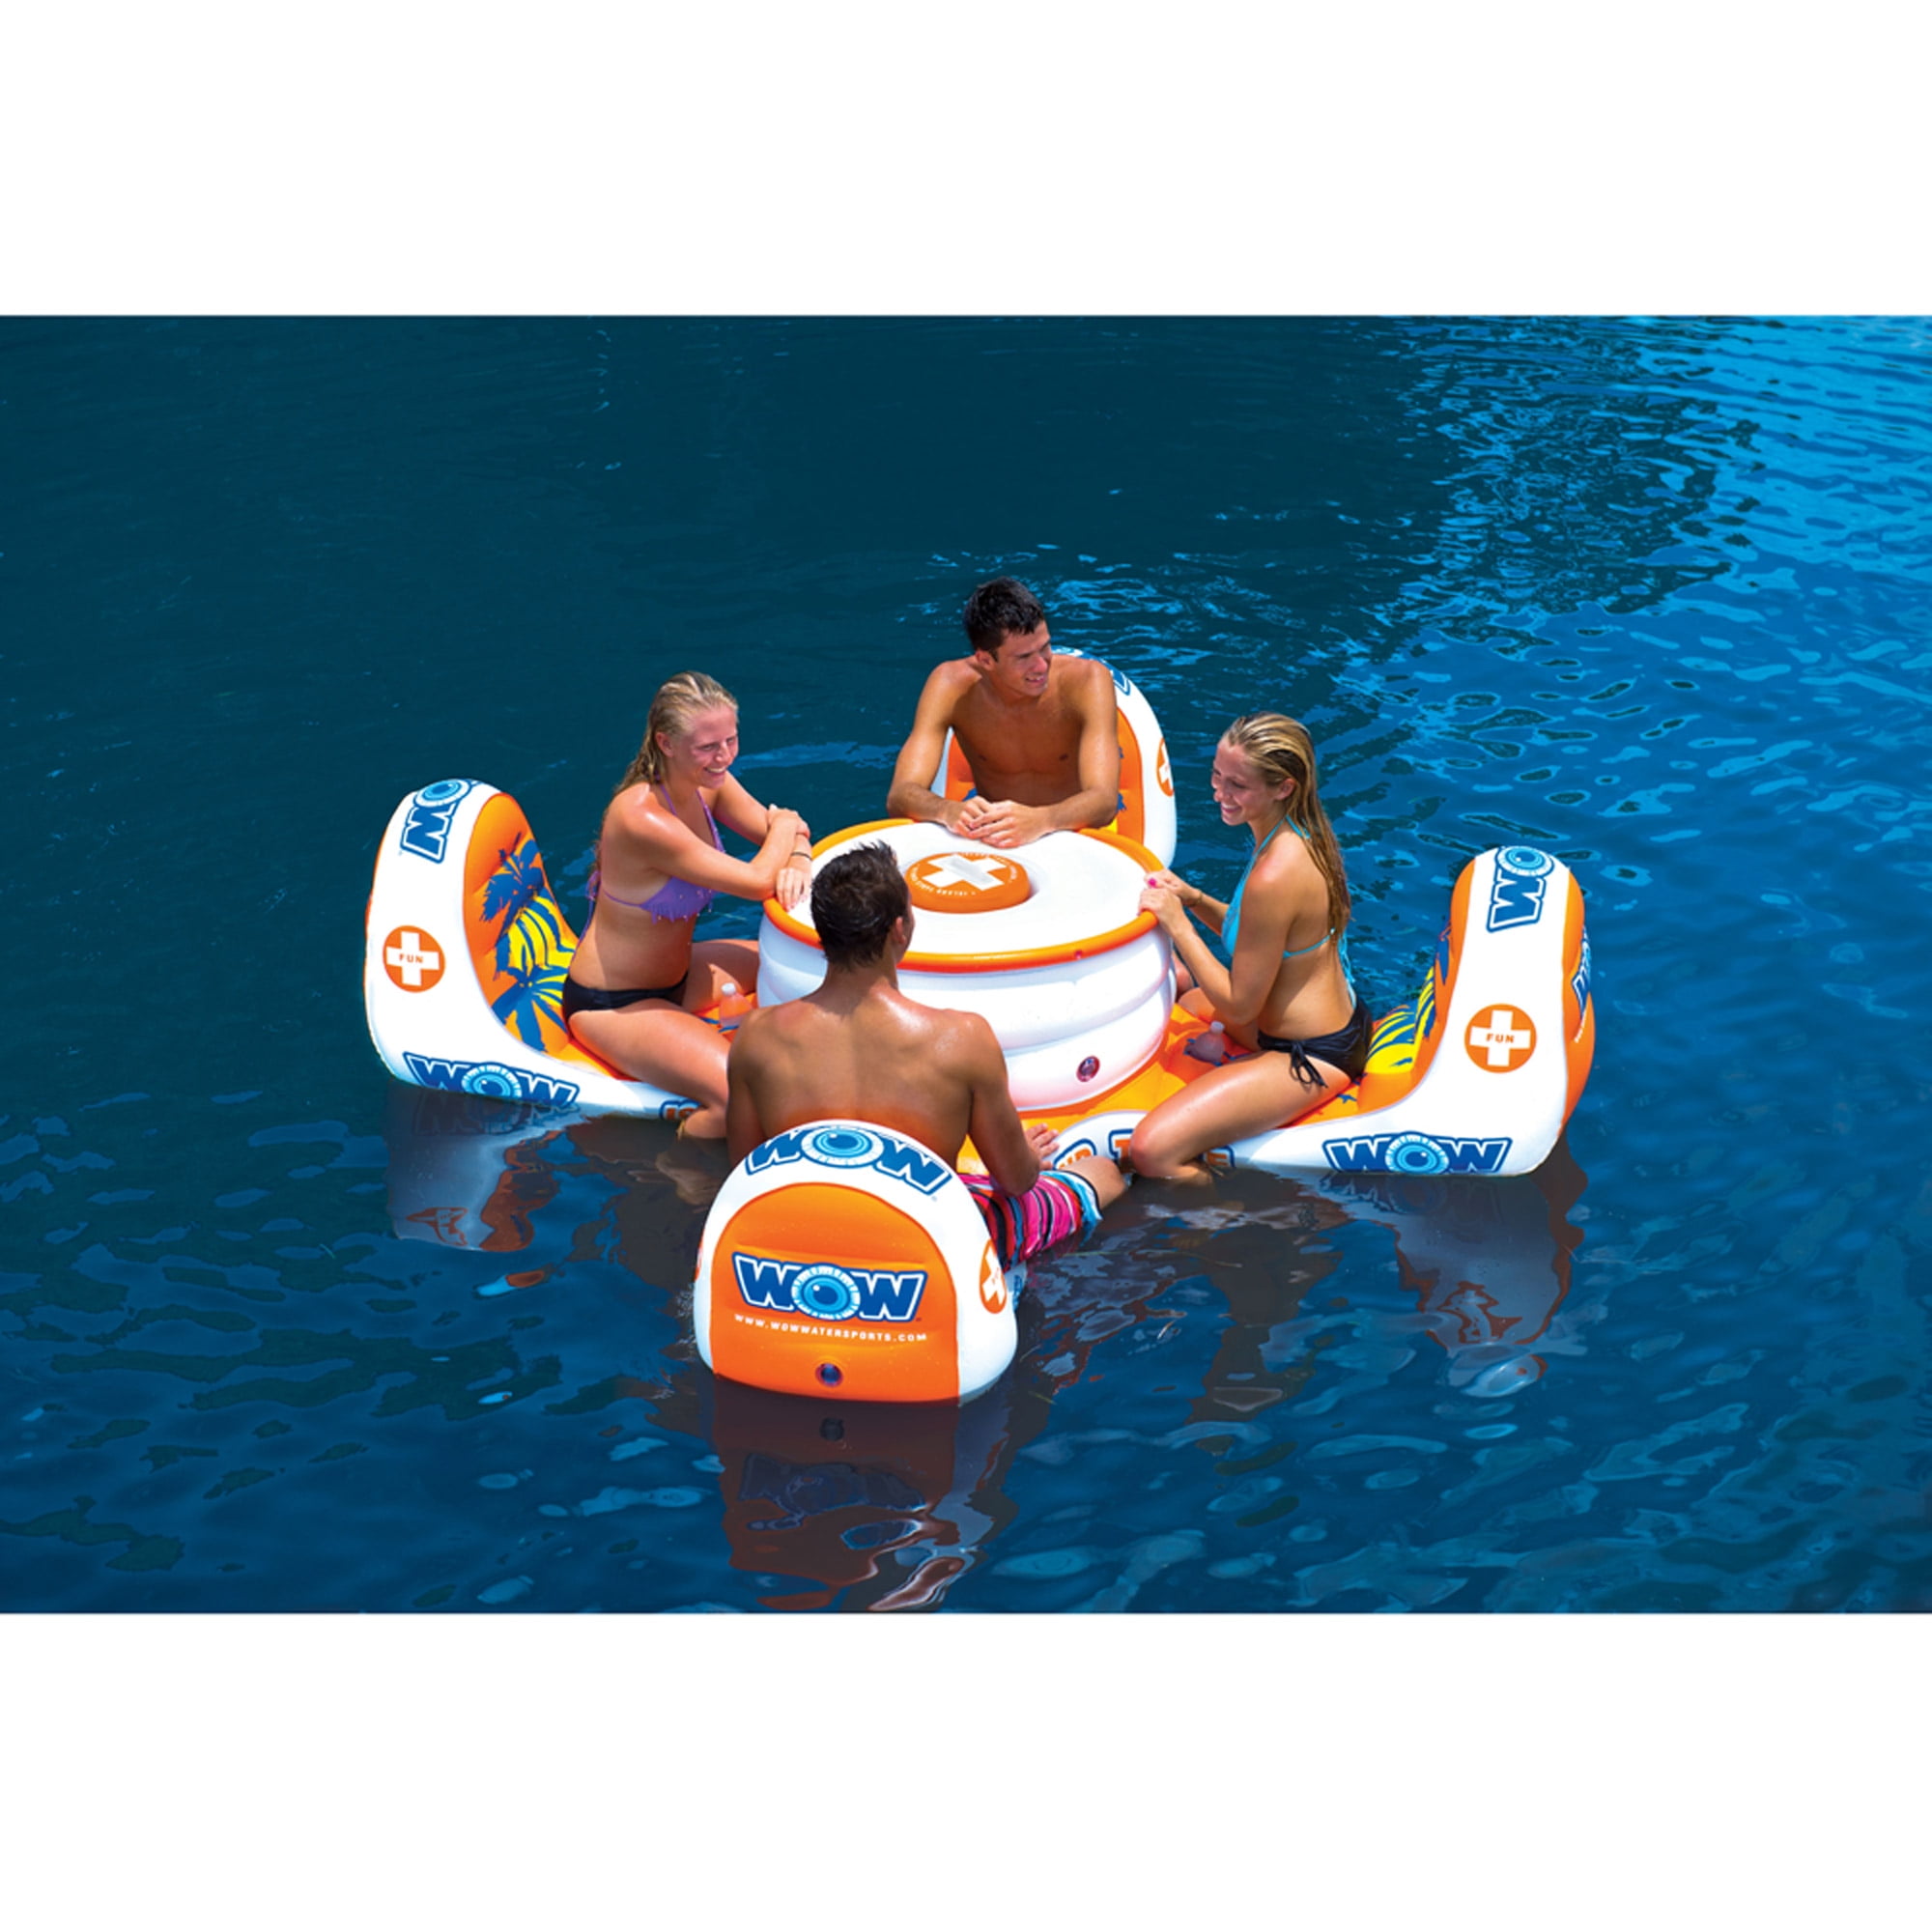 WOW Watersports 14-2070 Malibu Lounge Water Tube Inflatable 1 Person Chair Toy for sale online 